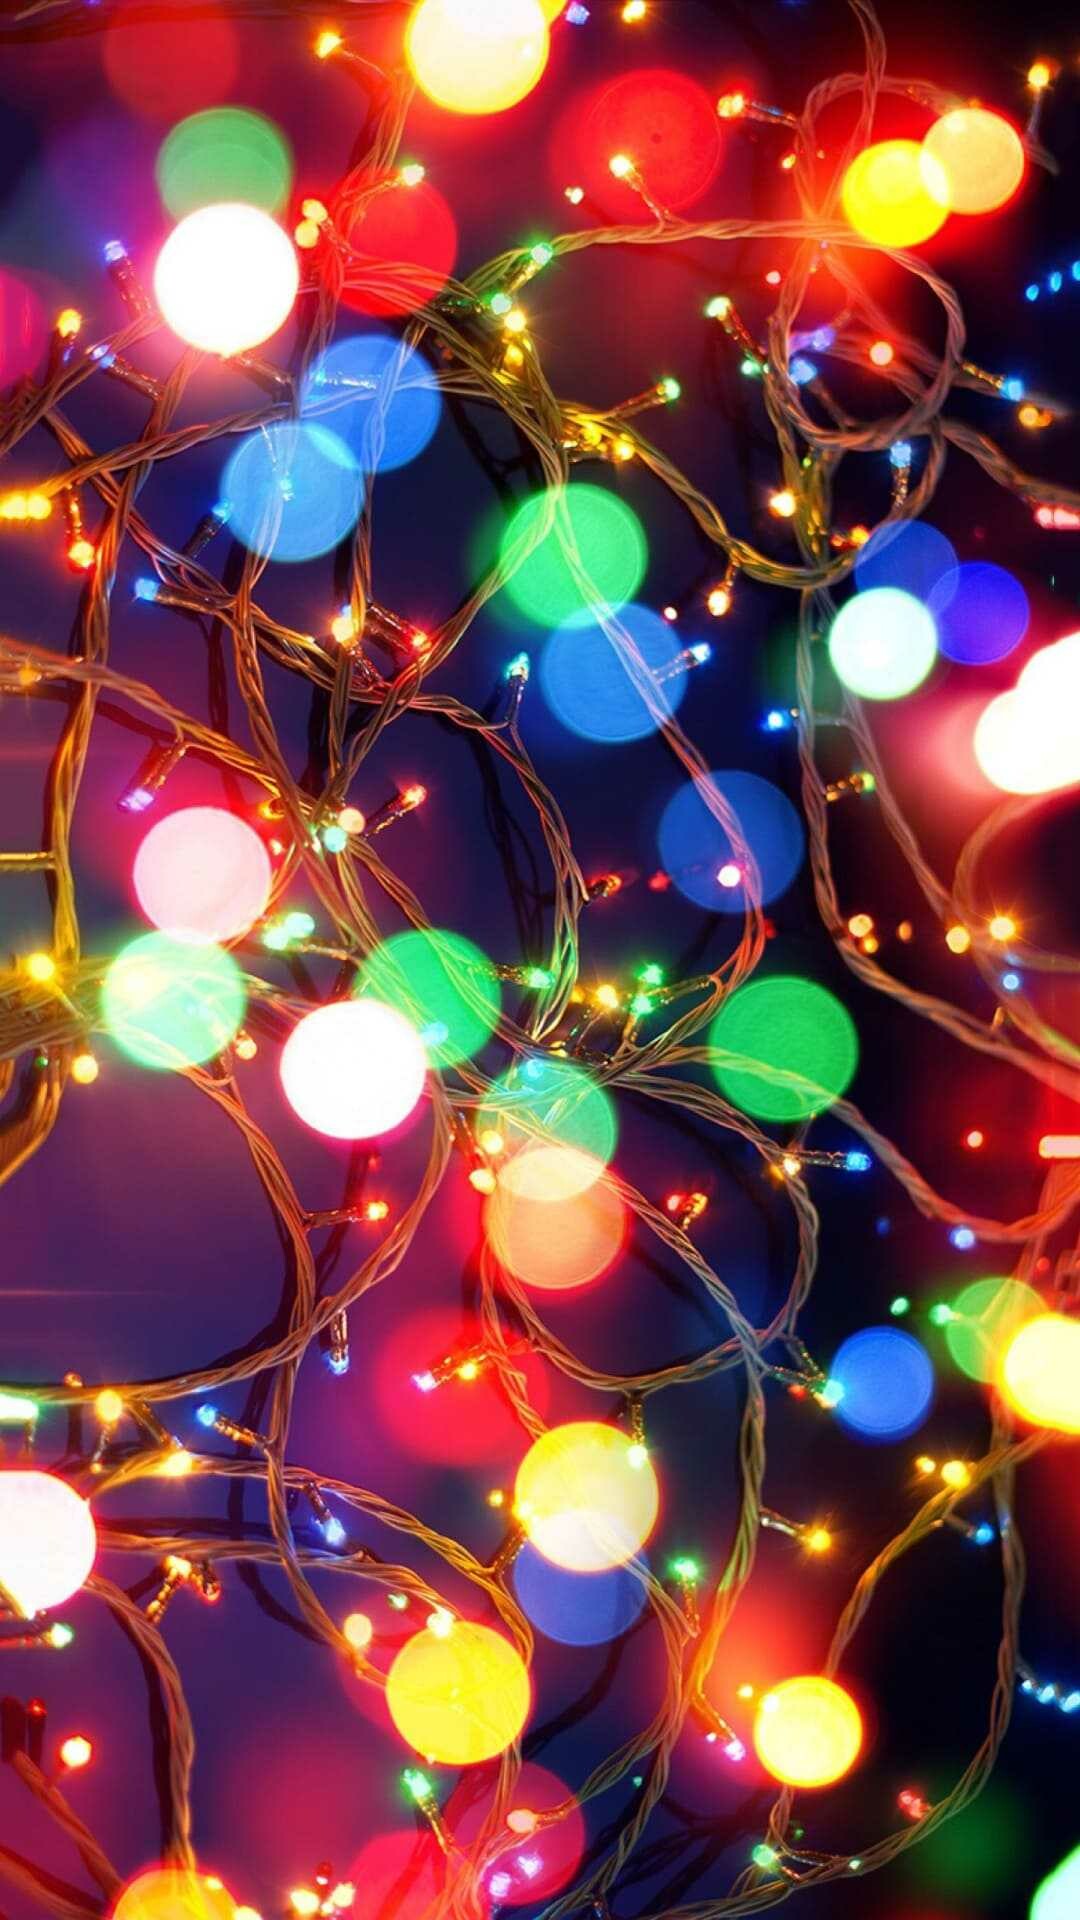 Christmas Lights: Often on display throughout the holiday season including Advent and Christmastide. 1080x1920 Full HD Wallpaper.